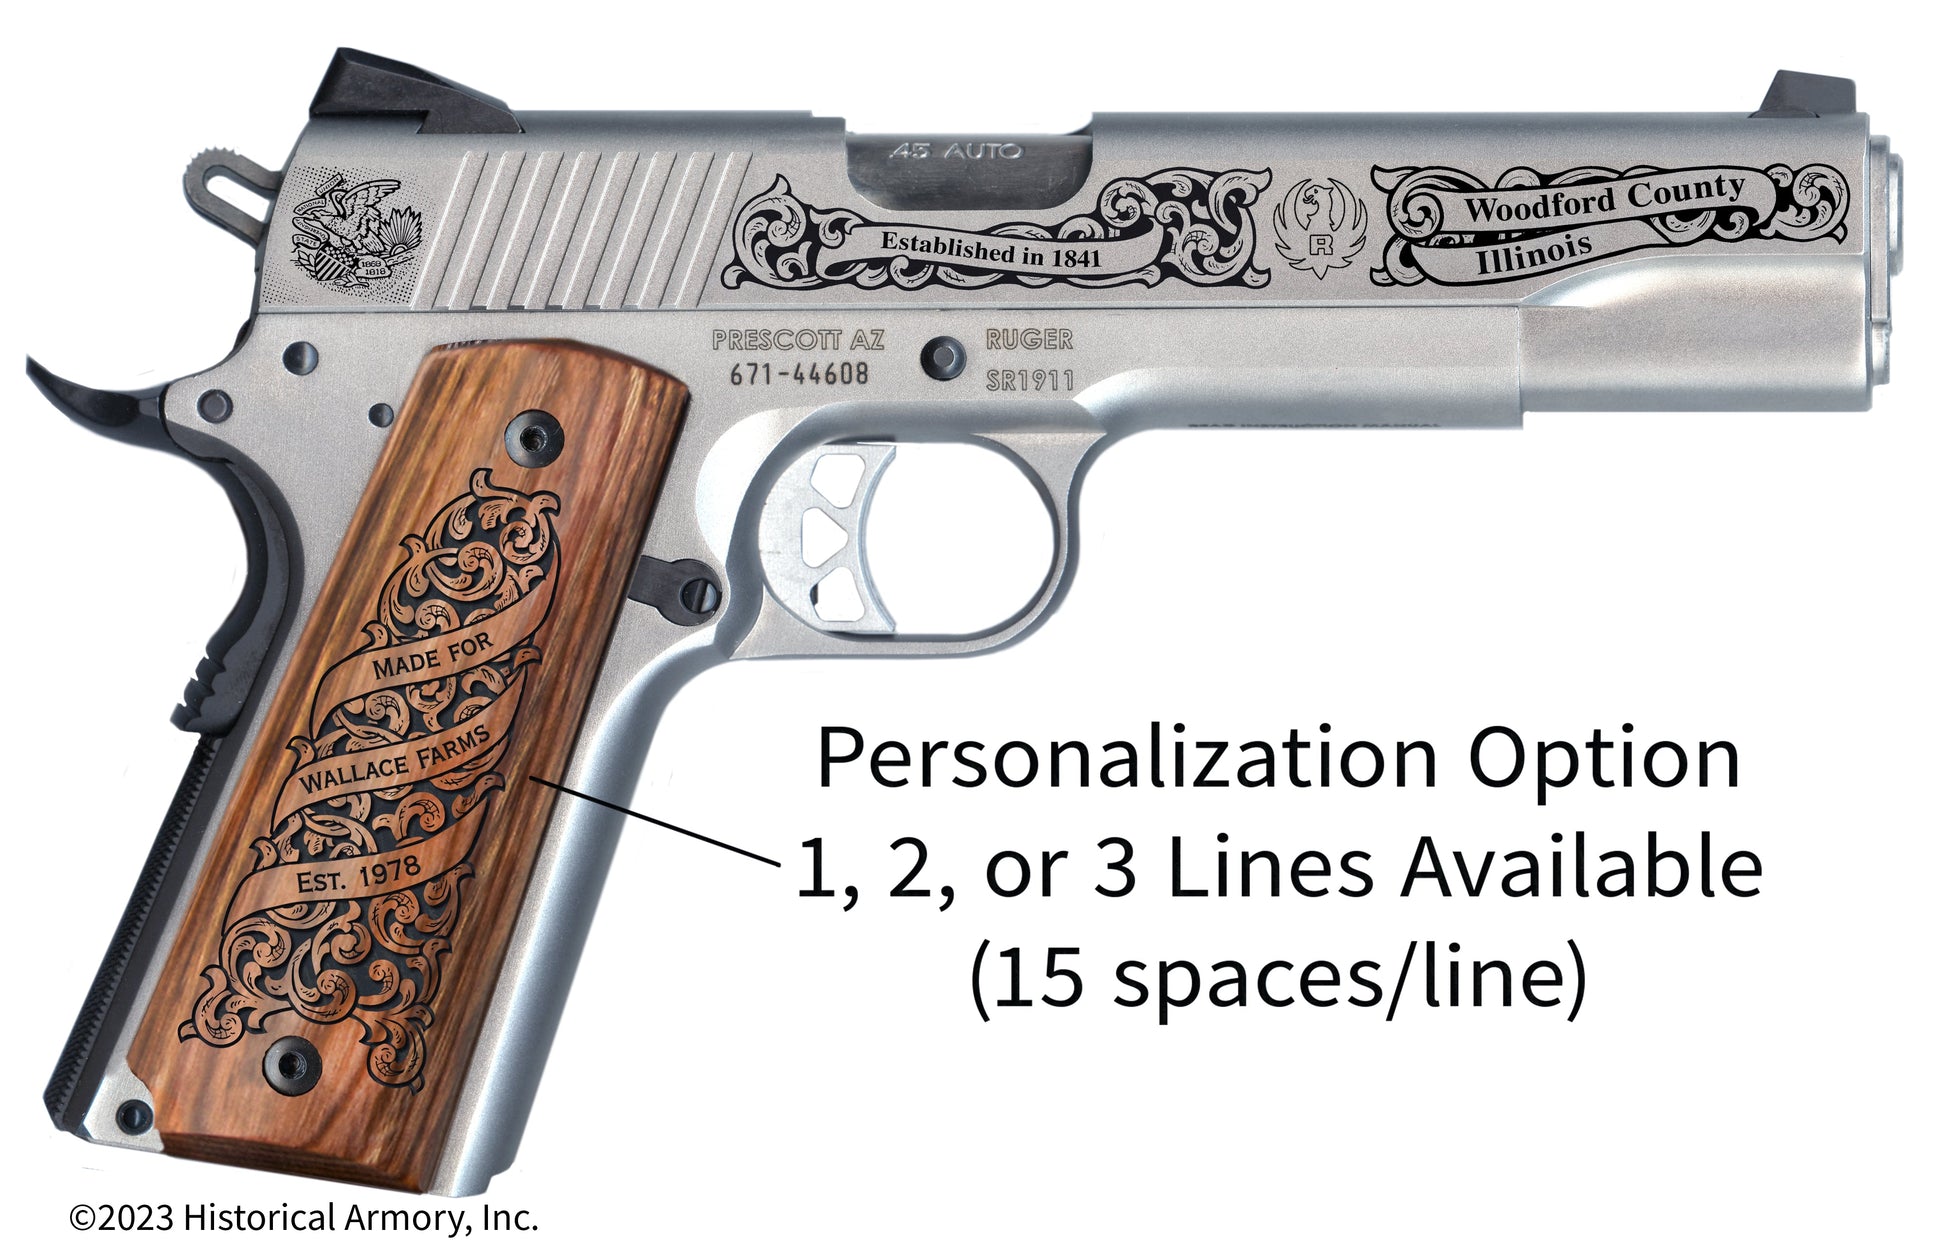 Woodford County Illinois Personalized Engraved .45 Auto Ruger 1911